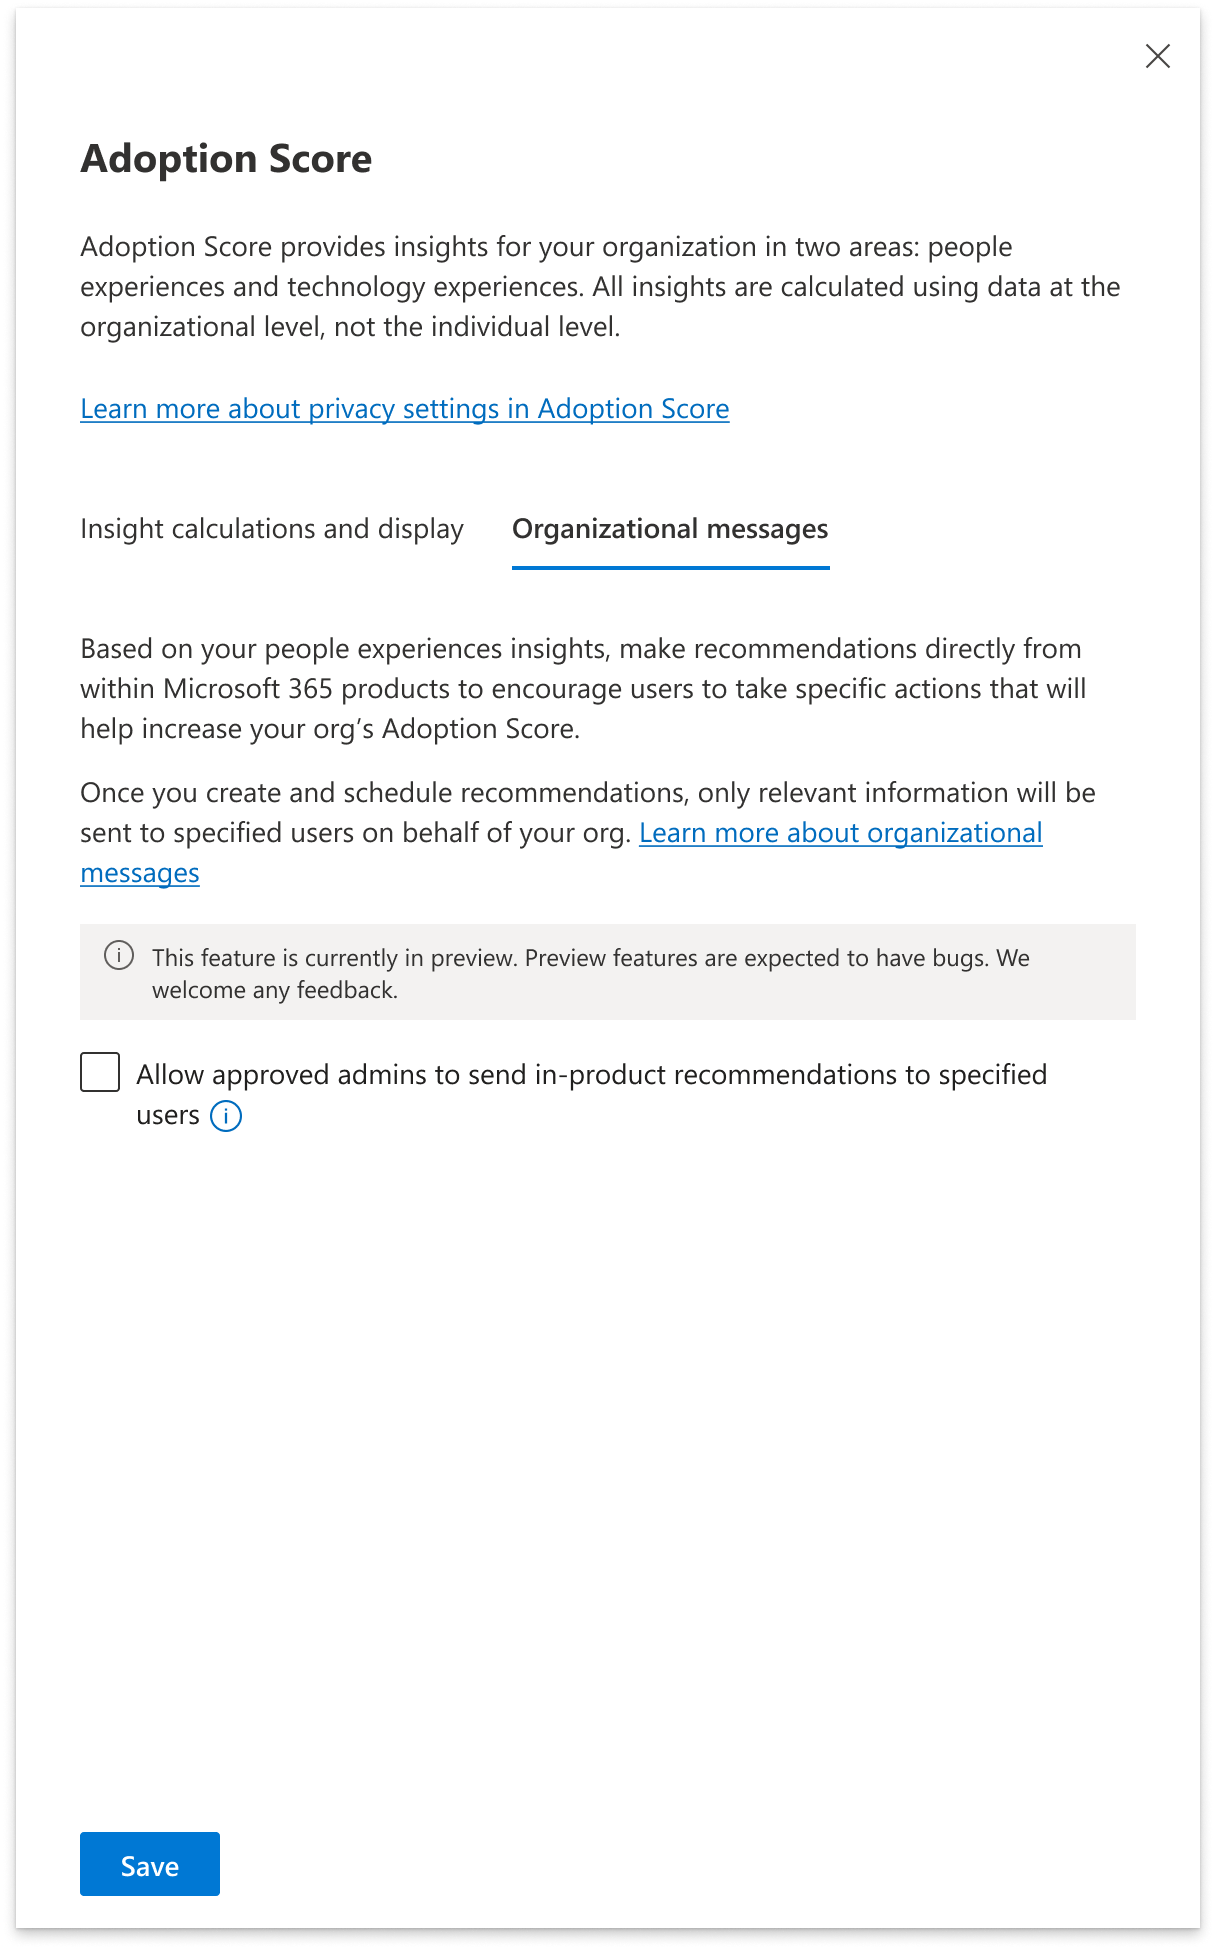 Organizational messages in Adoption Score use targeted, templatized in-product notifications to advise on Microsoft 365 recommended practices based on Adoption Score insights.